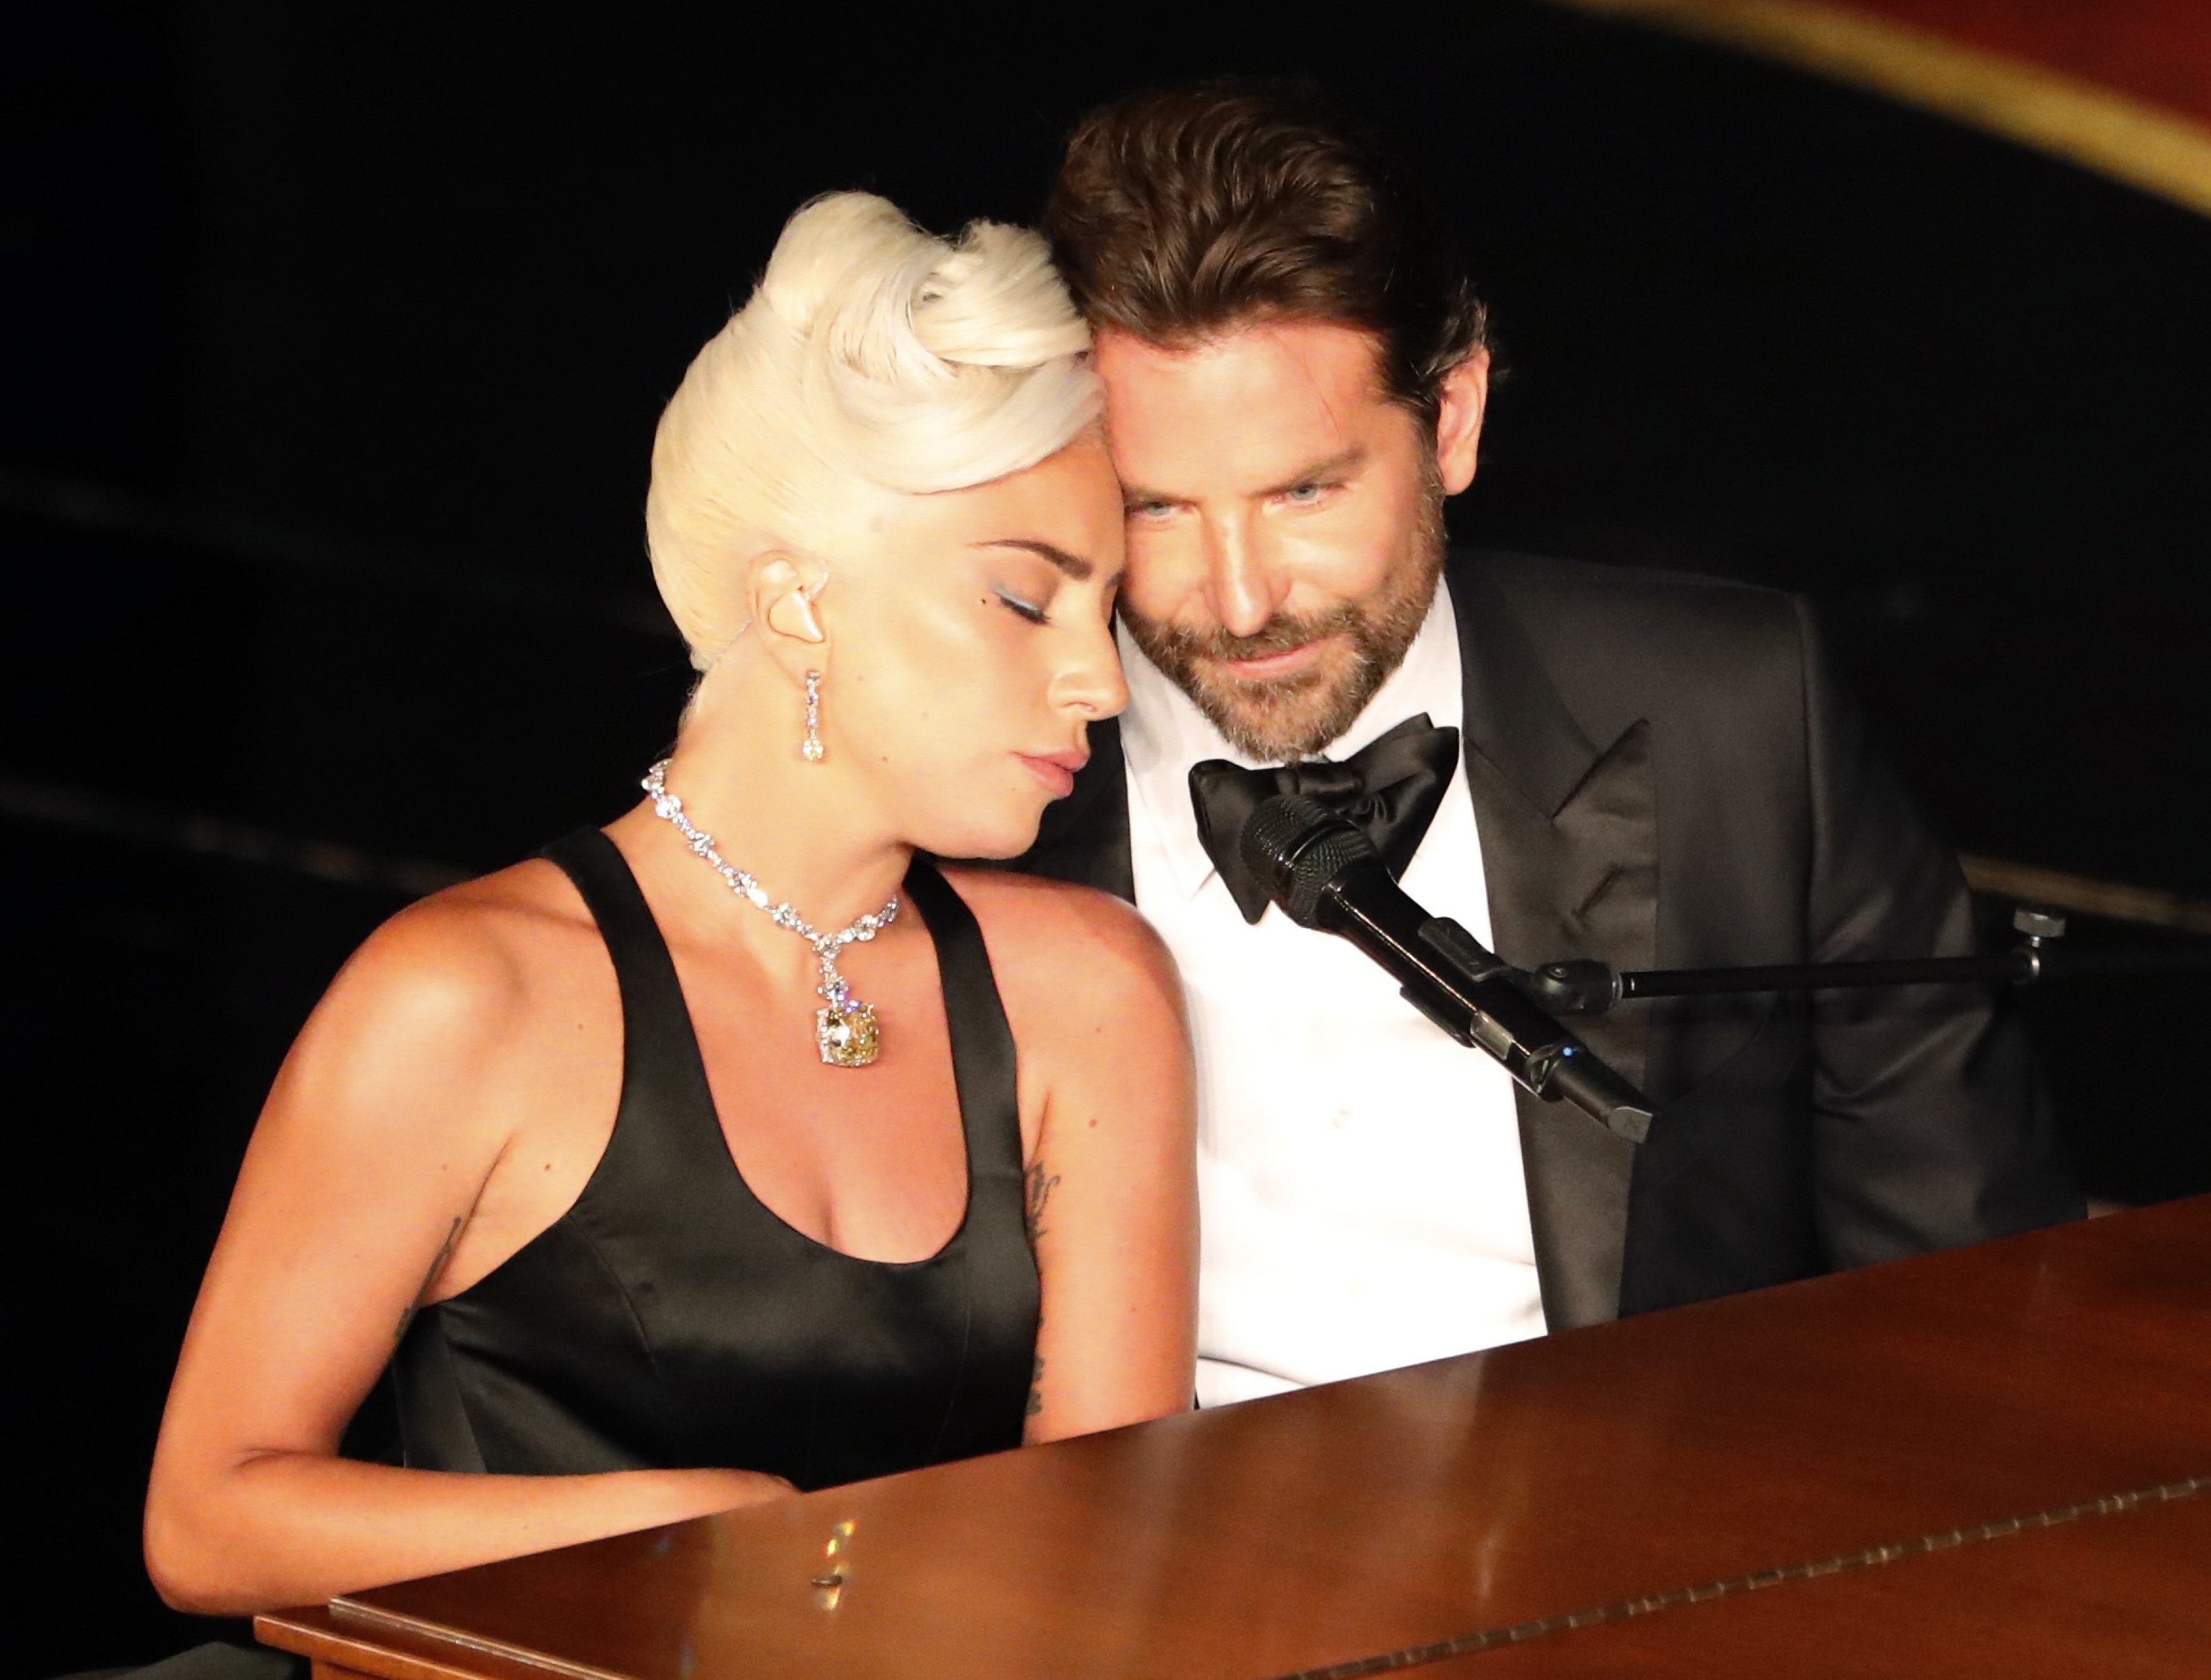 Lady Gaga and Bradley Cooper perform Shallow